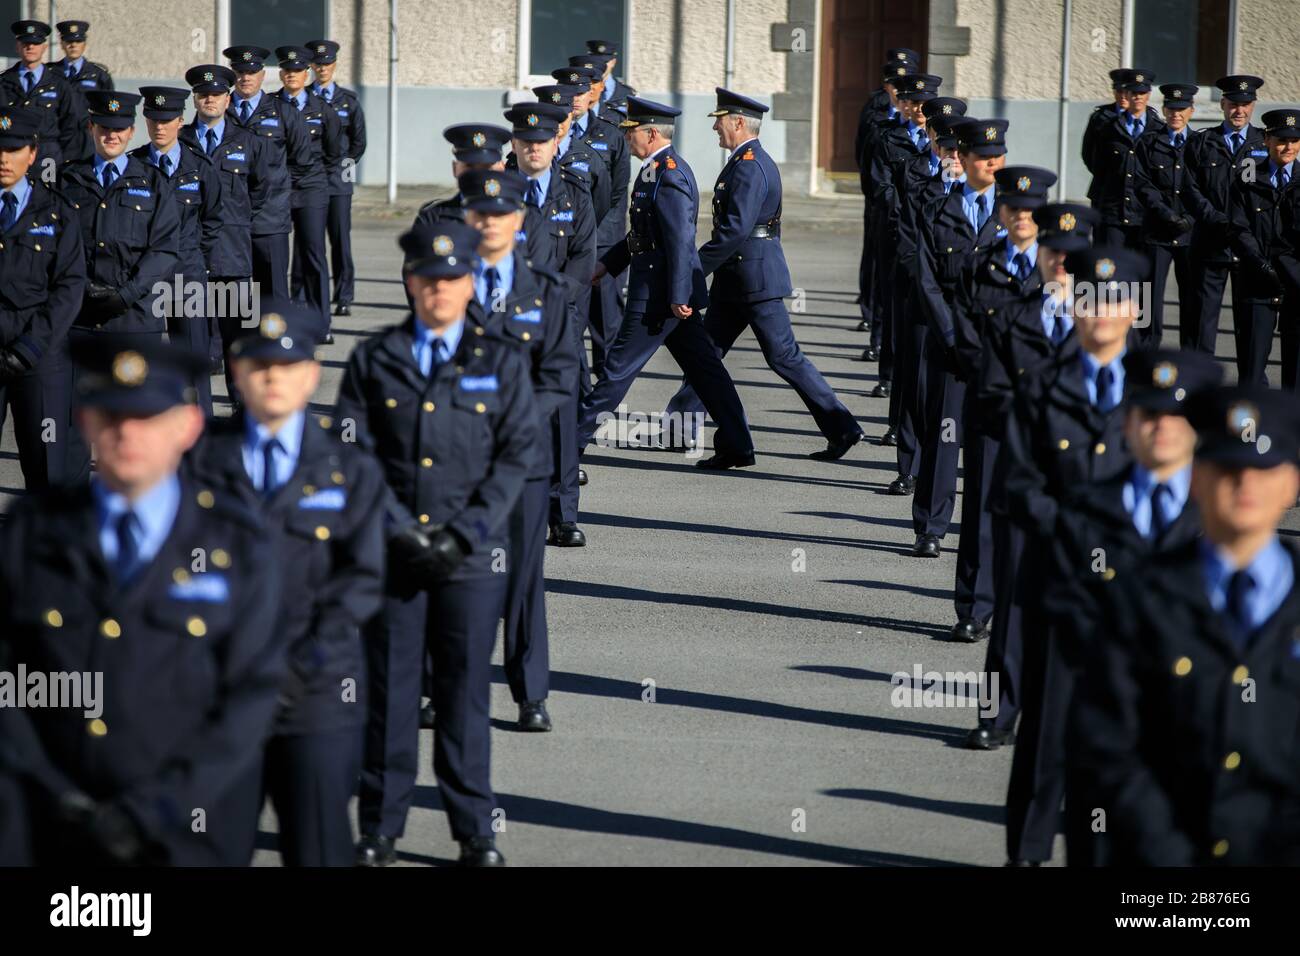 Commissioner Drew Harris and Chief Superintendent Pat Murray inspect the 319 new Gardai during an attestation ceremony at the Garda Training College in Templemore, Co Tipperary. The new Irish police will be deployed to stations nationwide to help respond to the Covid-19 crisis. Stock Photo